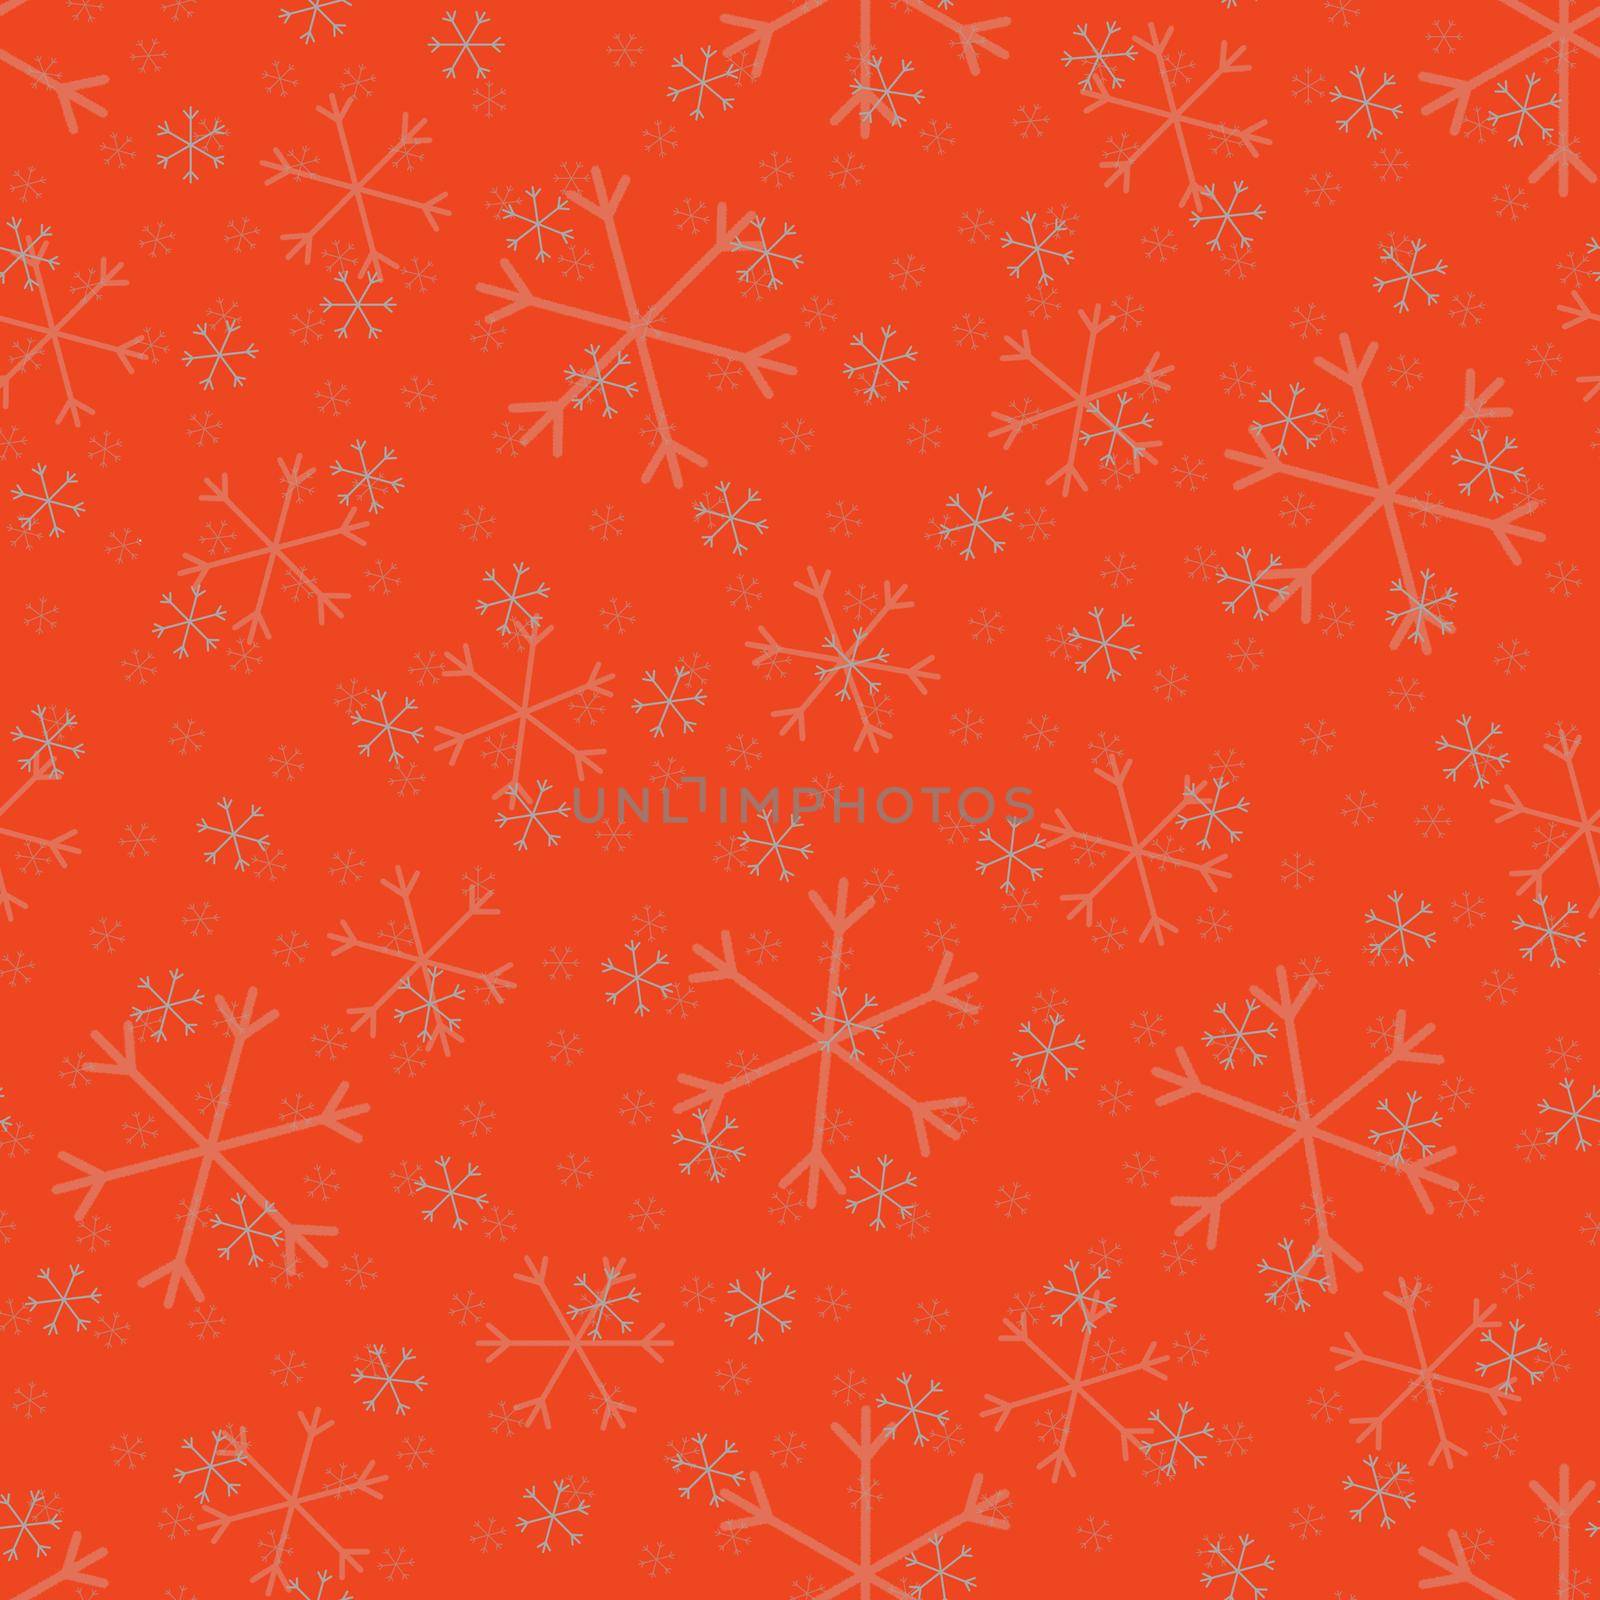 Seamless Christmas pattern doodle with hand random drawn snowflakes.Wrapping paper for presents, funny textile fabric print, design,decor, food wrap, backgrounds. new year.Raster copy.Coral, pink by Angelsmoon